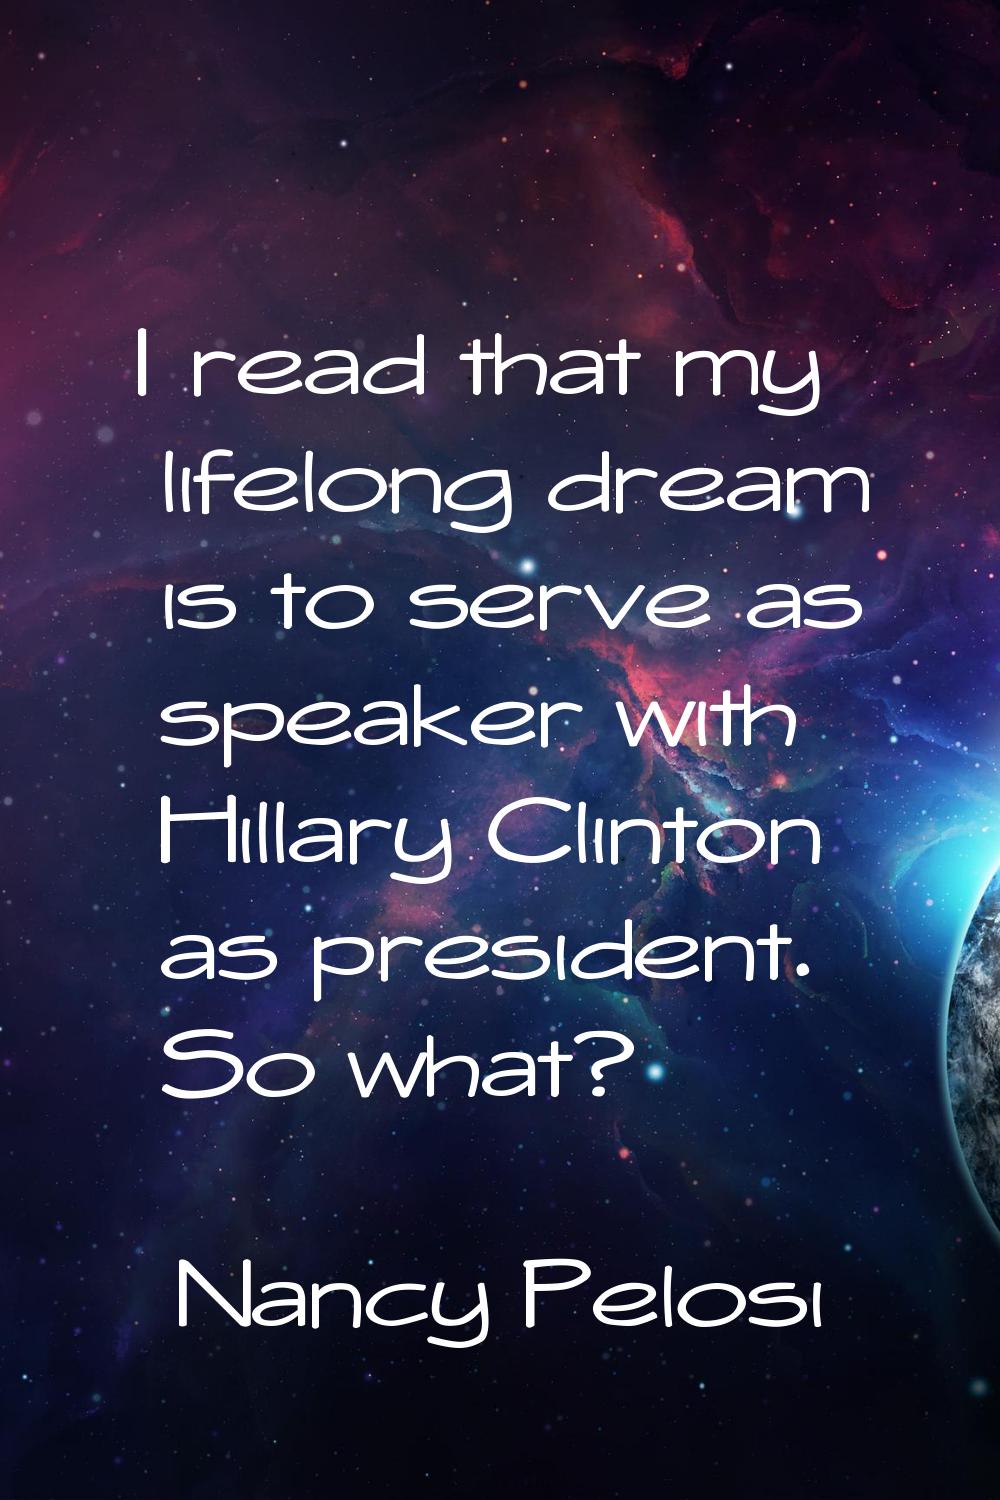 I read that my lifelong dream is to serve as speaker with Hillary Clinton as president. So what?